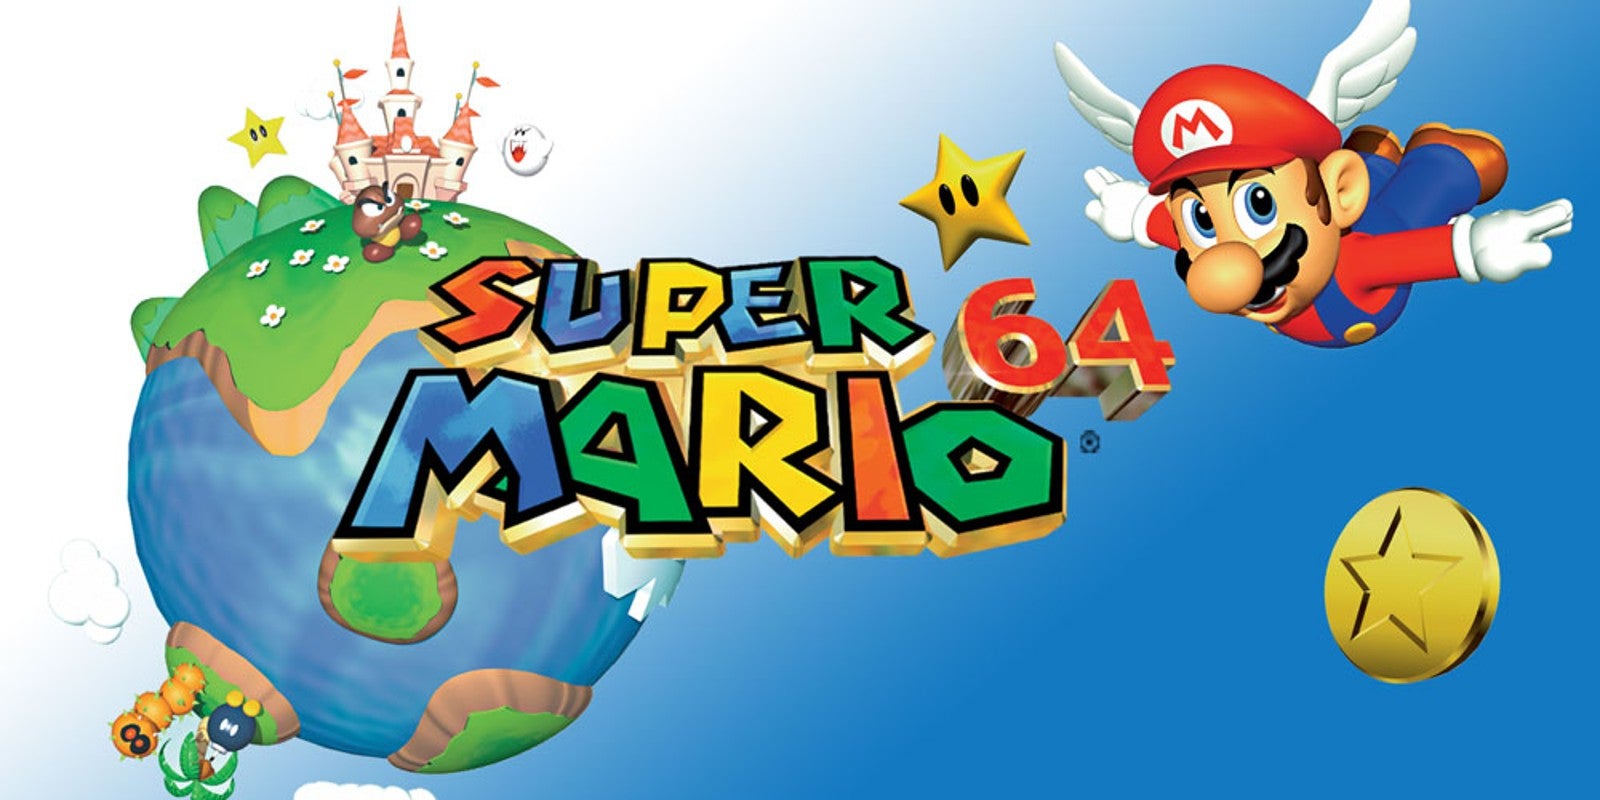 How Super Mario 64 changed the face of the games industry